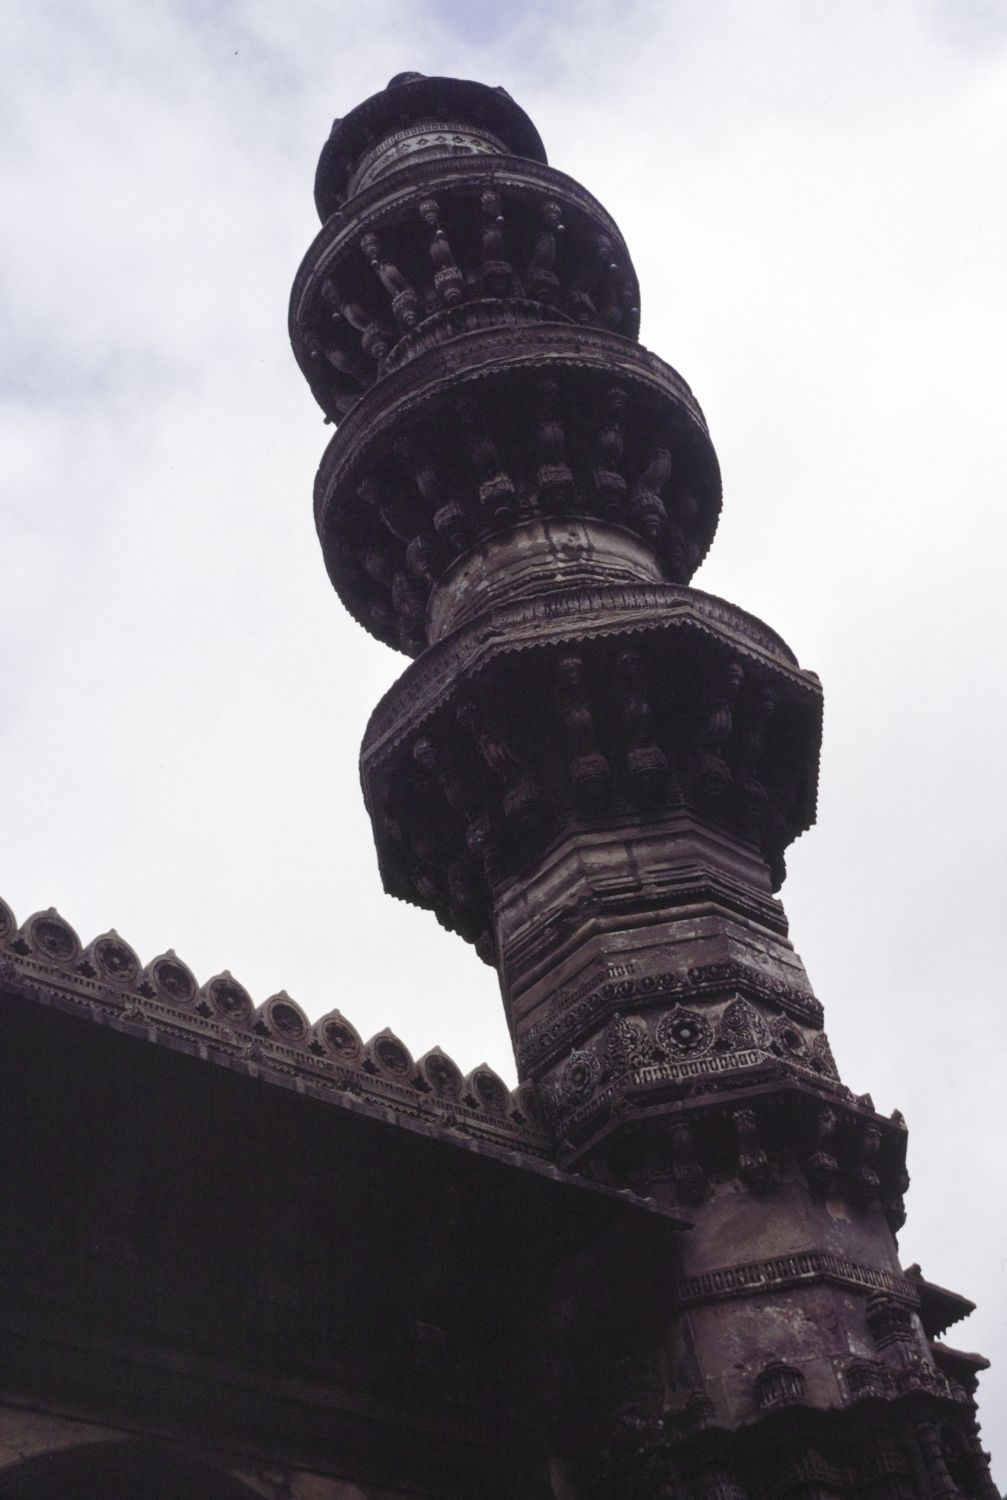 View of one of the minarets.